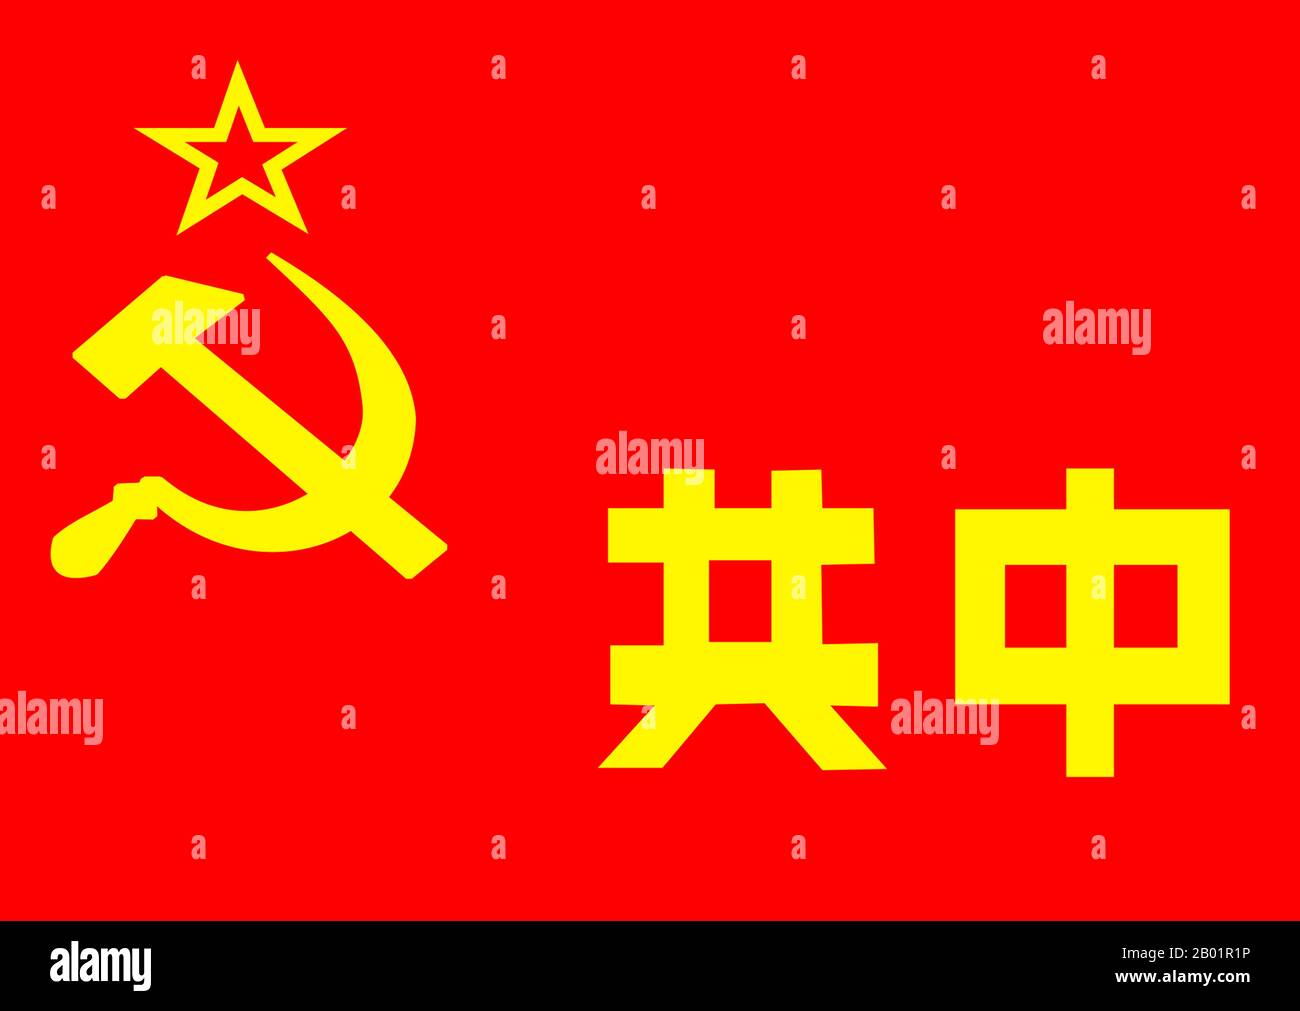 China: Flag of the Chinese Soviet Republic in Jiangxi, 1931-1934.  The Jiangxi-Fujian Soviet (commonly called the Jiangxi Soviet) was the largest component territory of the Chinese Soviet Republic, an unrecognised state established in November 1931 by Mao Zedong and Zhu De during the Chinese civil war. The Jiangxi-Fujian Soviet was home to the town of Ruijin, the county seat and headquarters of the CSR government.  The Jiangxi-Fujian base area was defended ably by the First Red Front Army but in 1934 was finally overrun by the Kuomintang government's National Revolutionary Army. Stock Photo